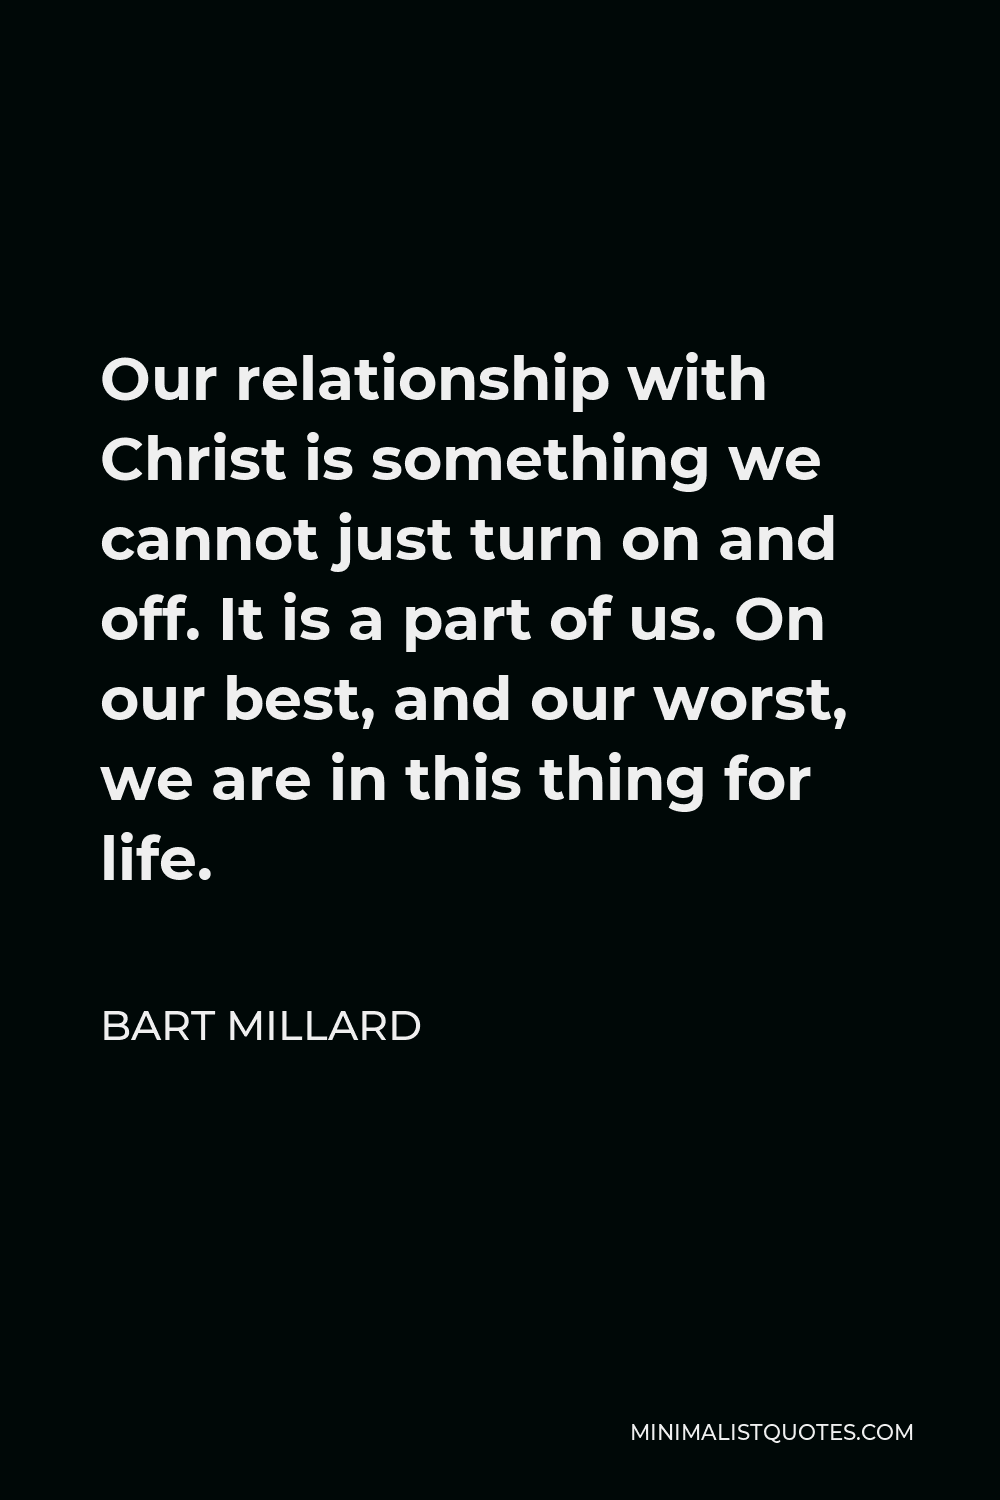 Bart Millard Quote - Our relationship with Christ is something we cannot just turn on and off. It is a part of us. On our best, and our worst, we are in this thing for life.